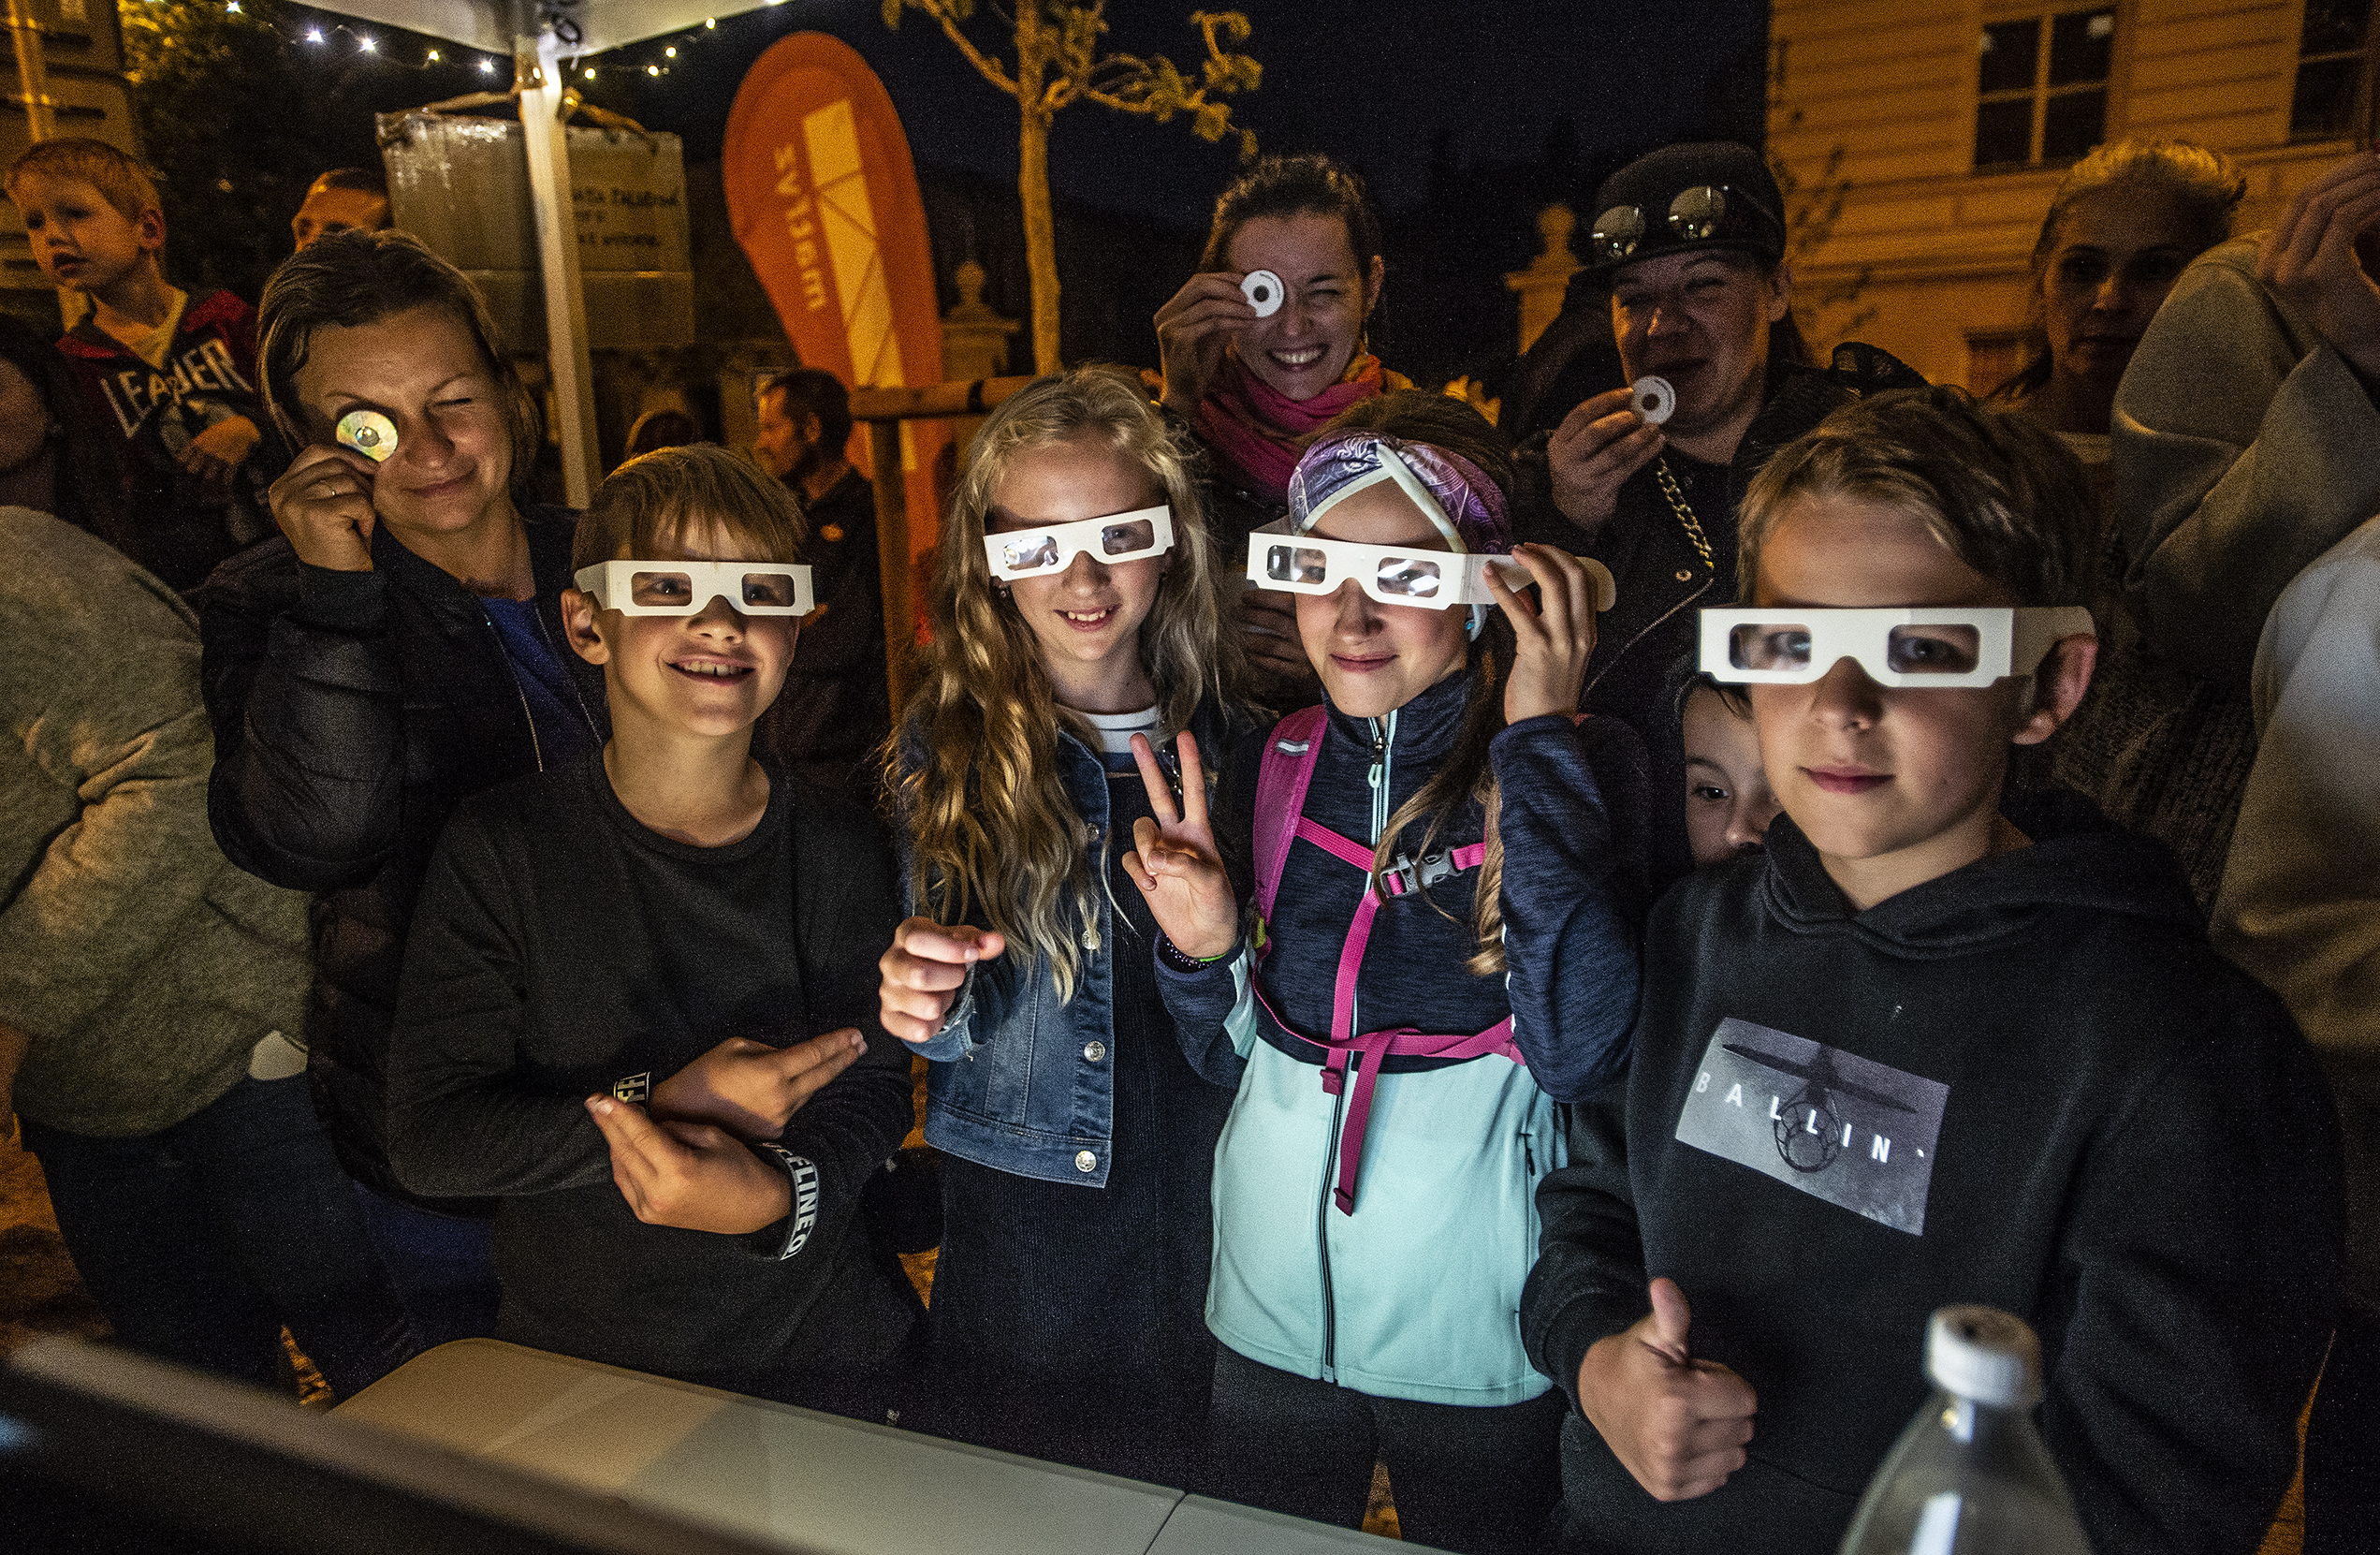 Five children wear diffraction glasses to participate in an outreach event.